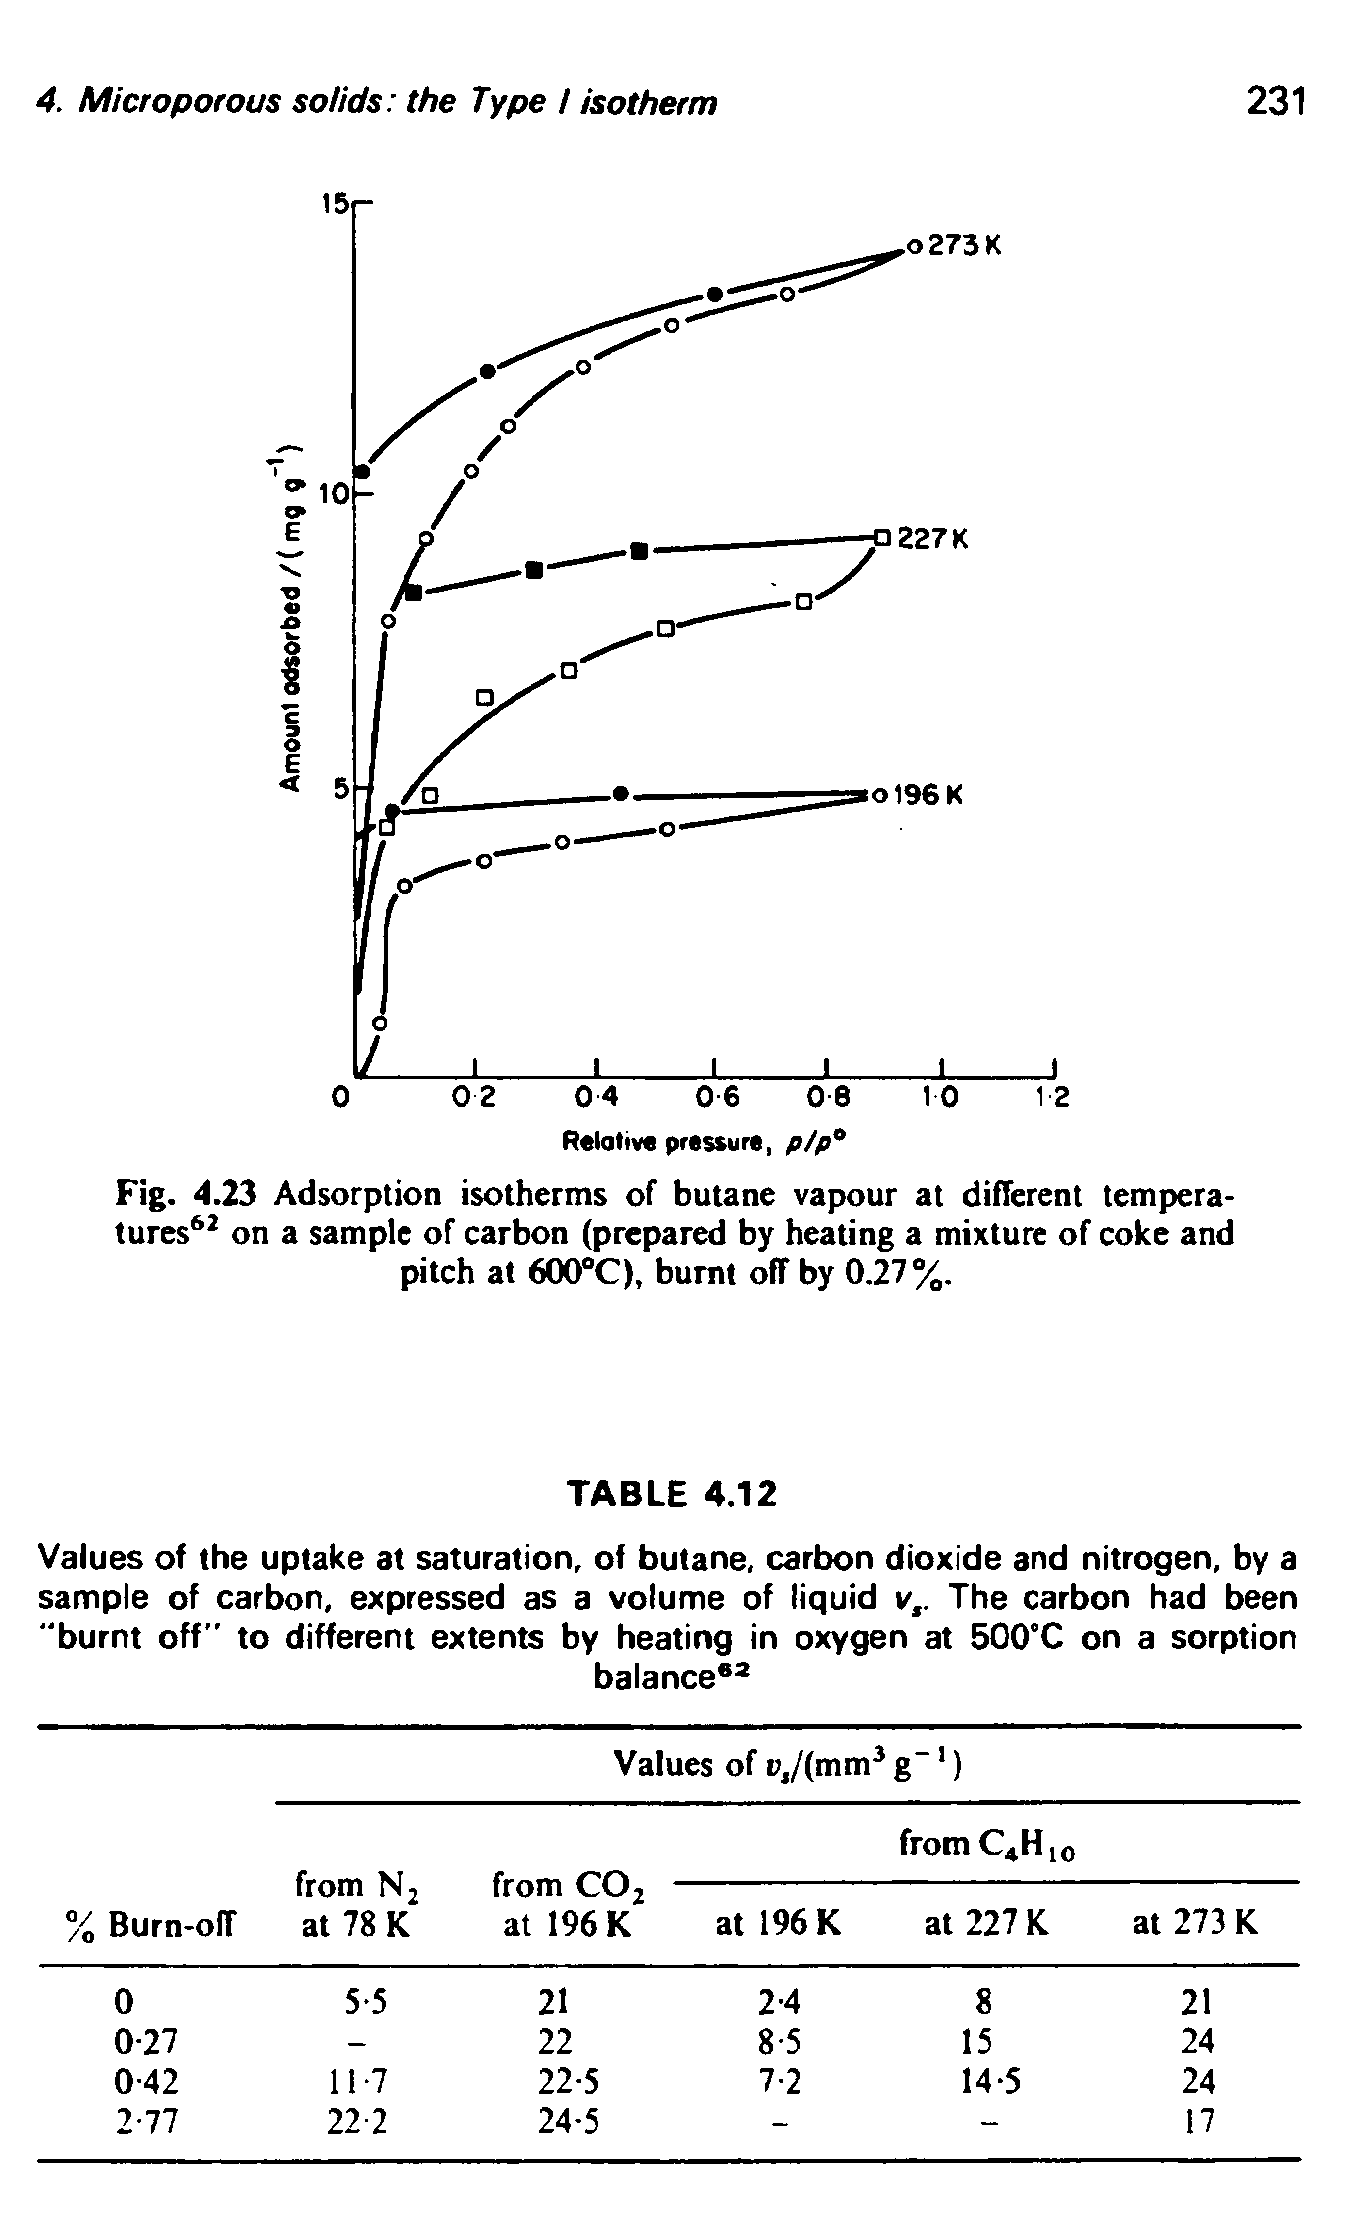 Fig. 4.23 Adsorption isotherms of butane vapour at difTerent temperatures on a sample of carbon (prepared by heating a mixture of coke and pitch at 600°C), burnt off by 0.27%.